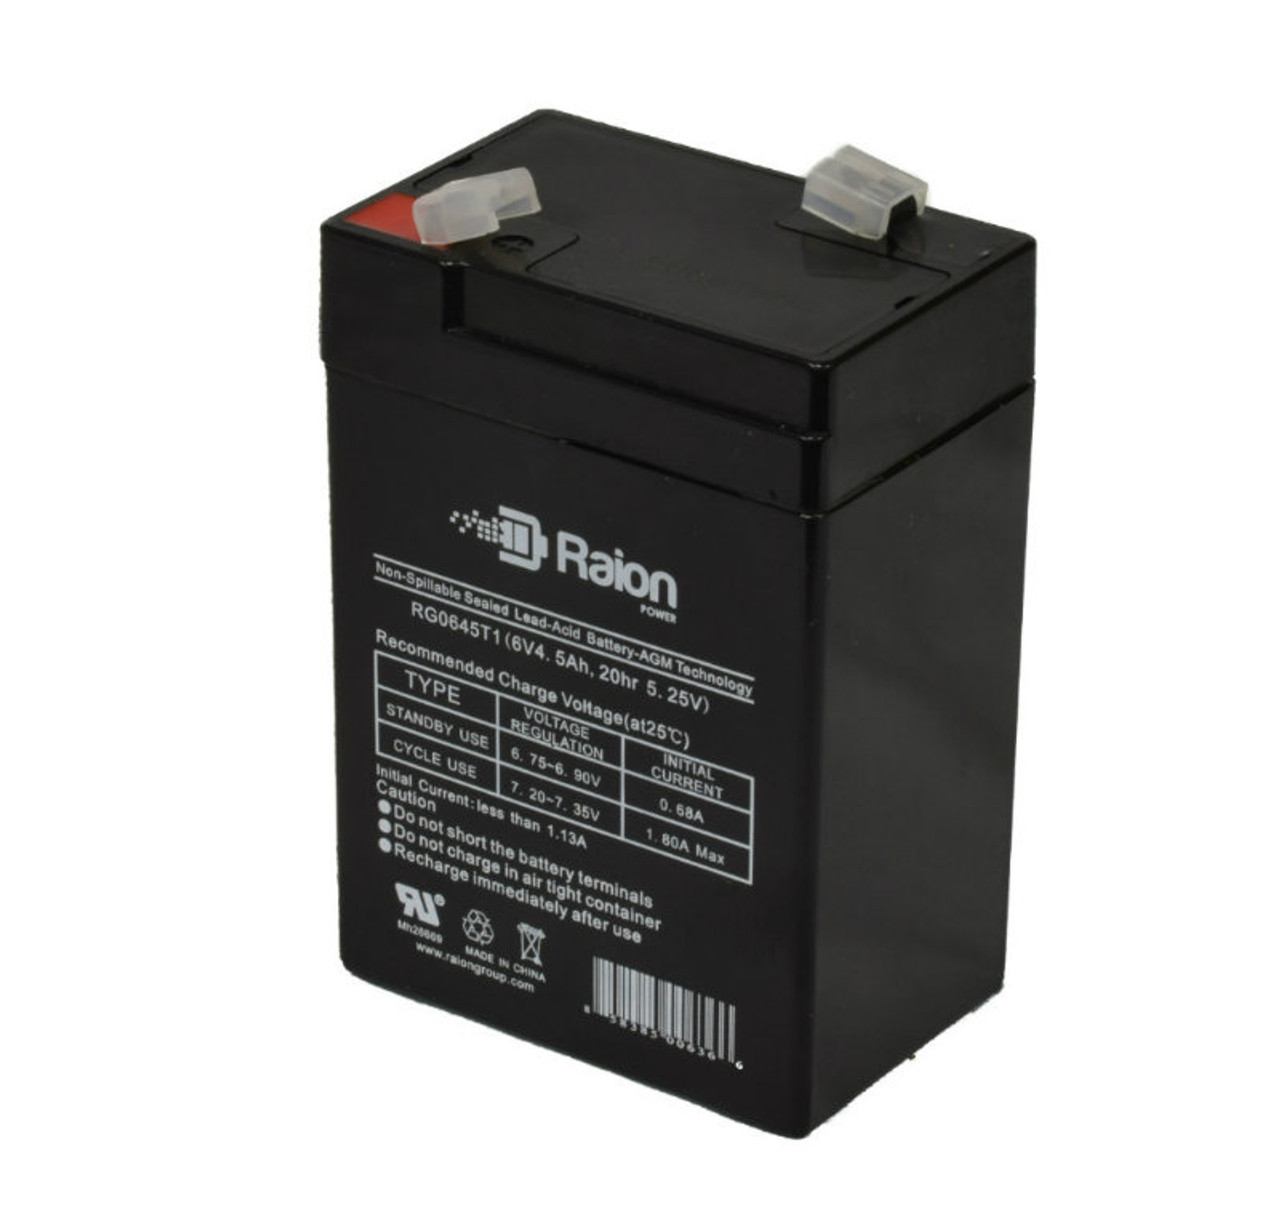 Raion Power RG0645T1 6V 4.5Ah Replacement Battery Cartridge for MCA NP4.5-6CUT